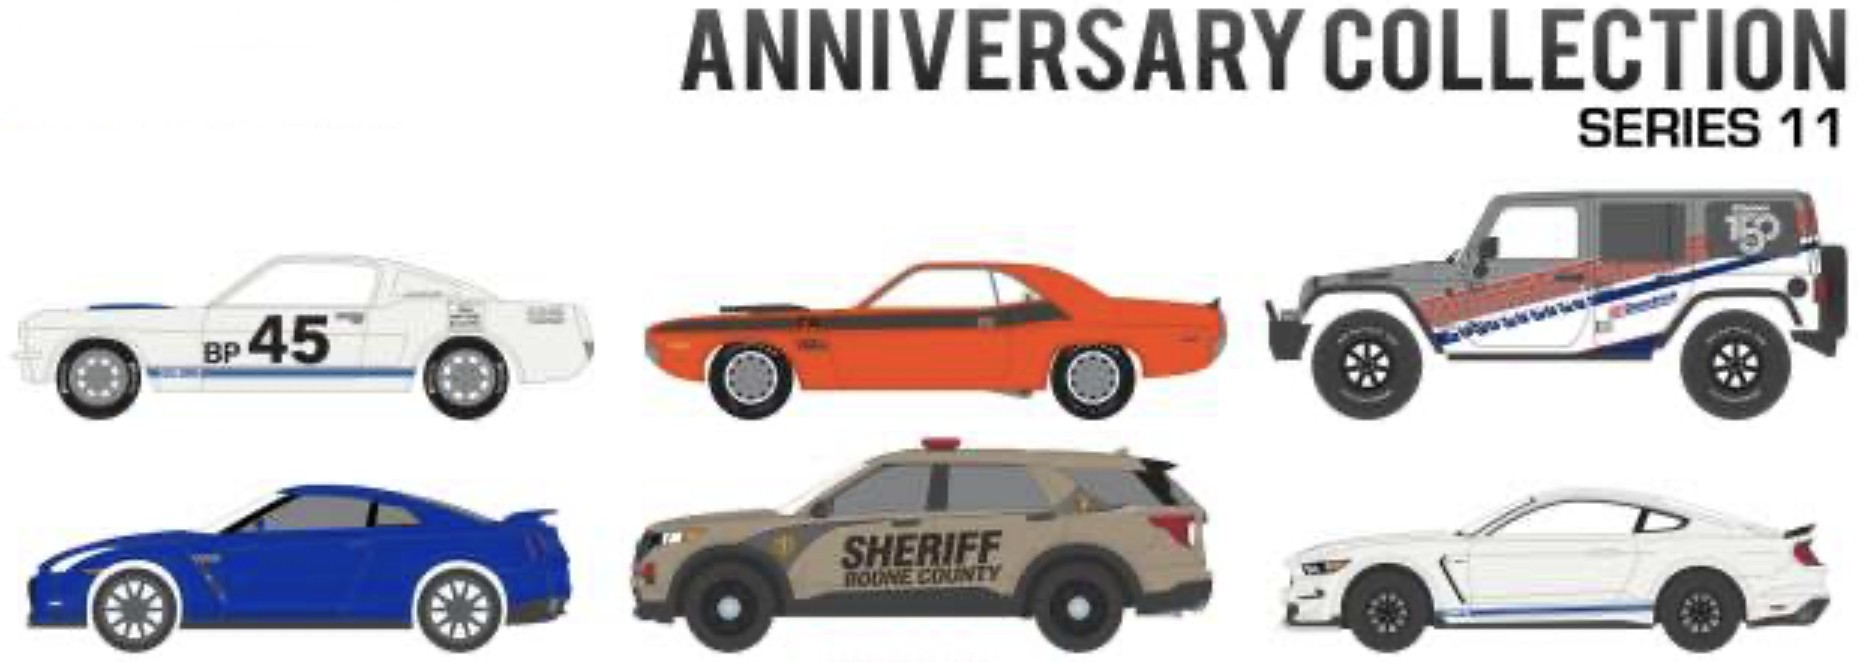 ANNIVERSARY COLLECTION SERIES 11 - 6 CAR SET 